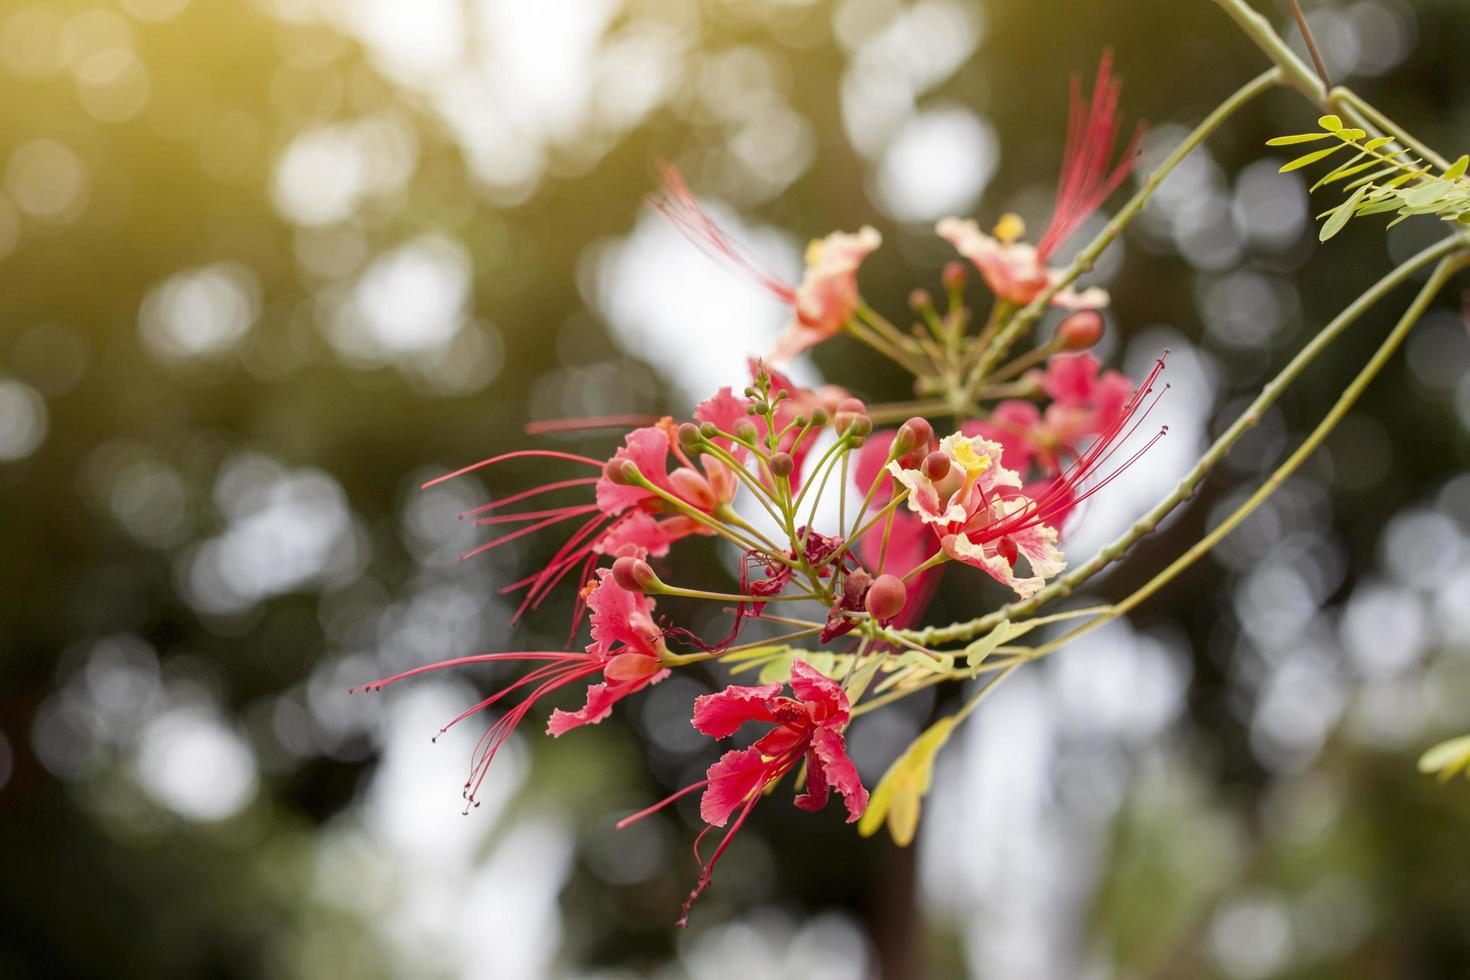 Flamebuoyant Tree or Flam of The Forest bouquet bloom with sunlight in the garden on blur nature background. photo